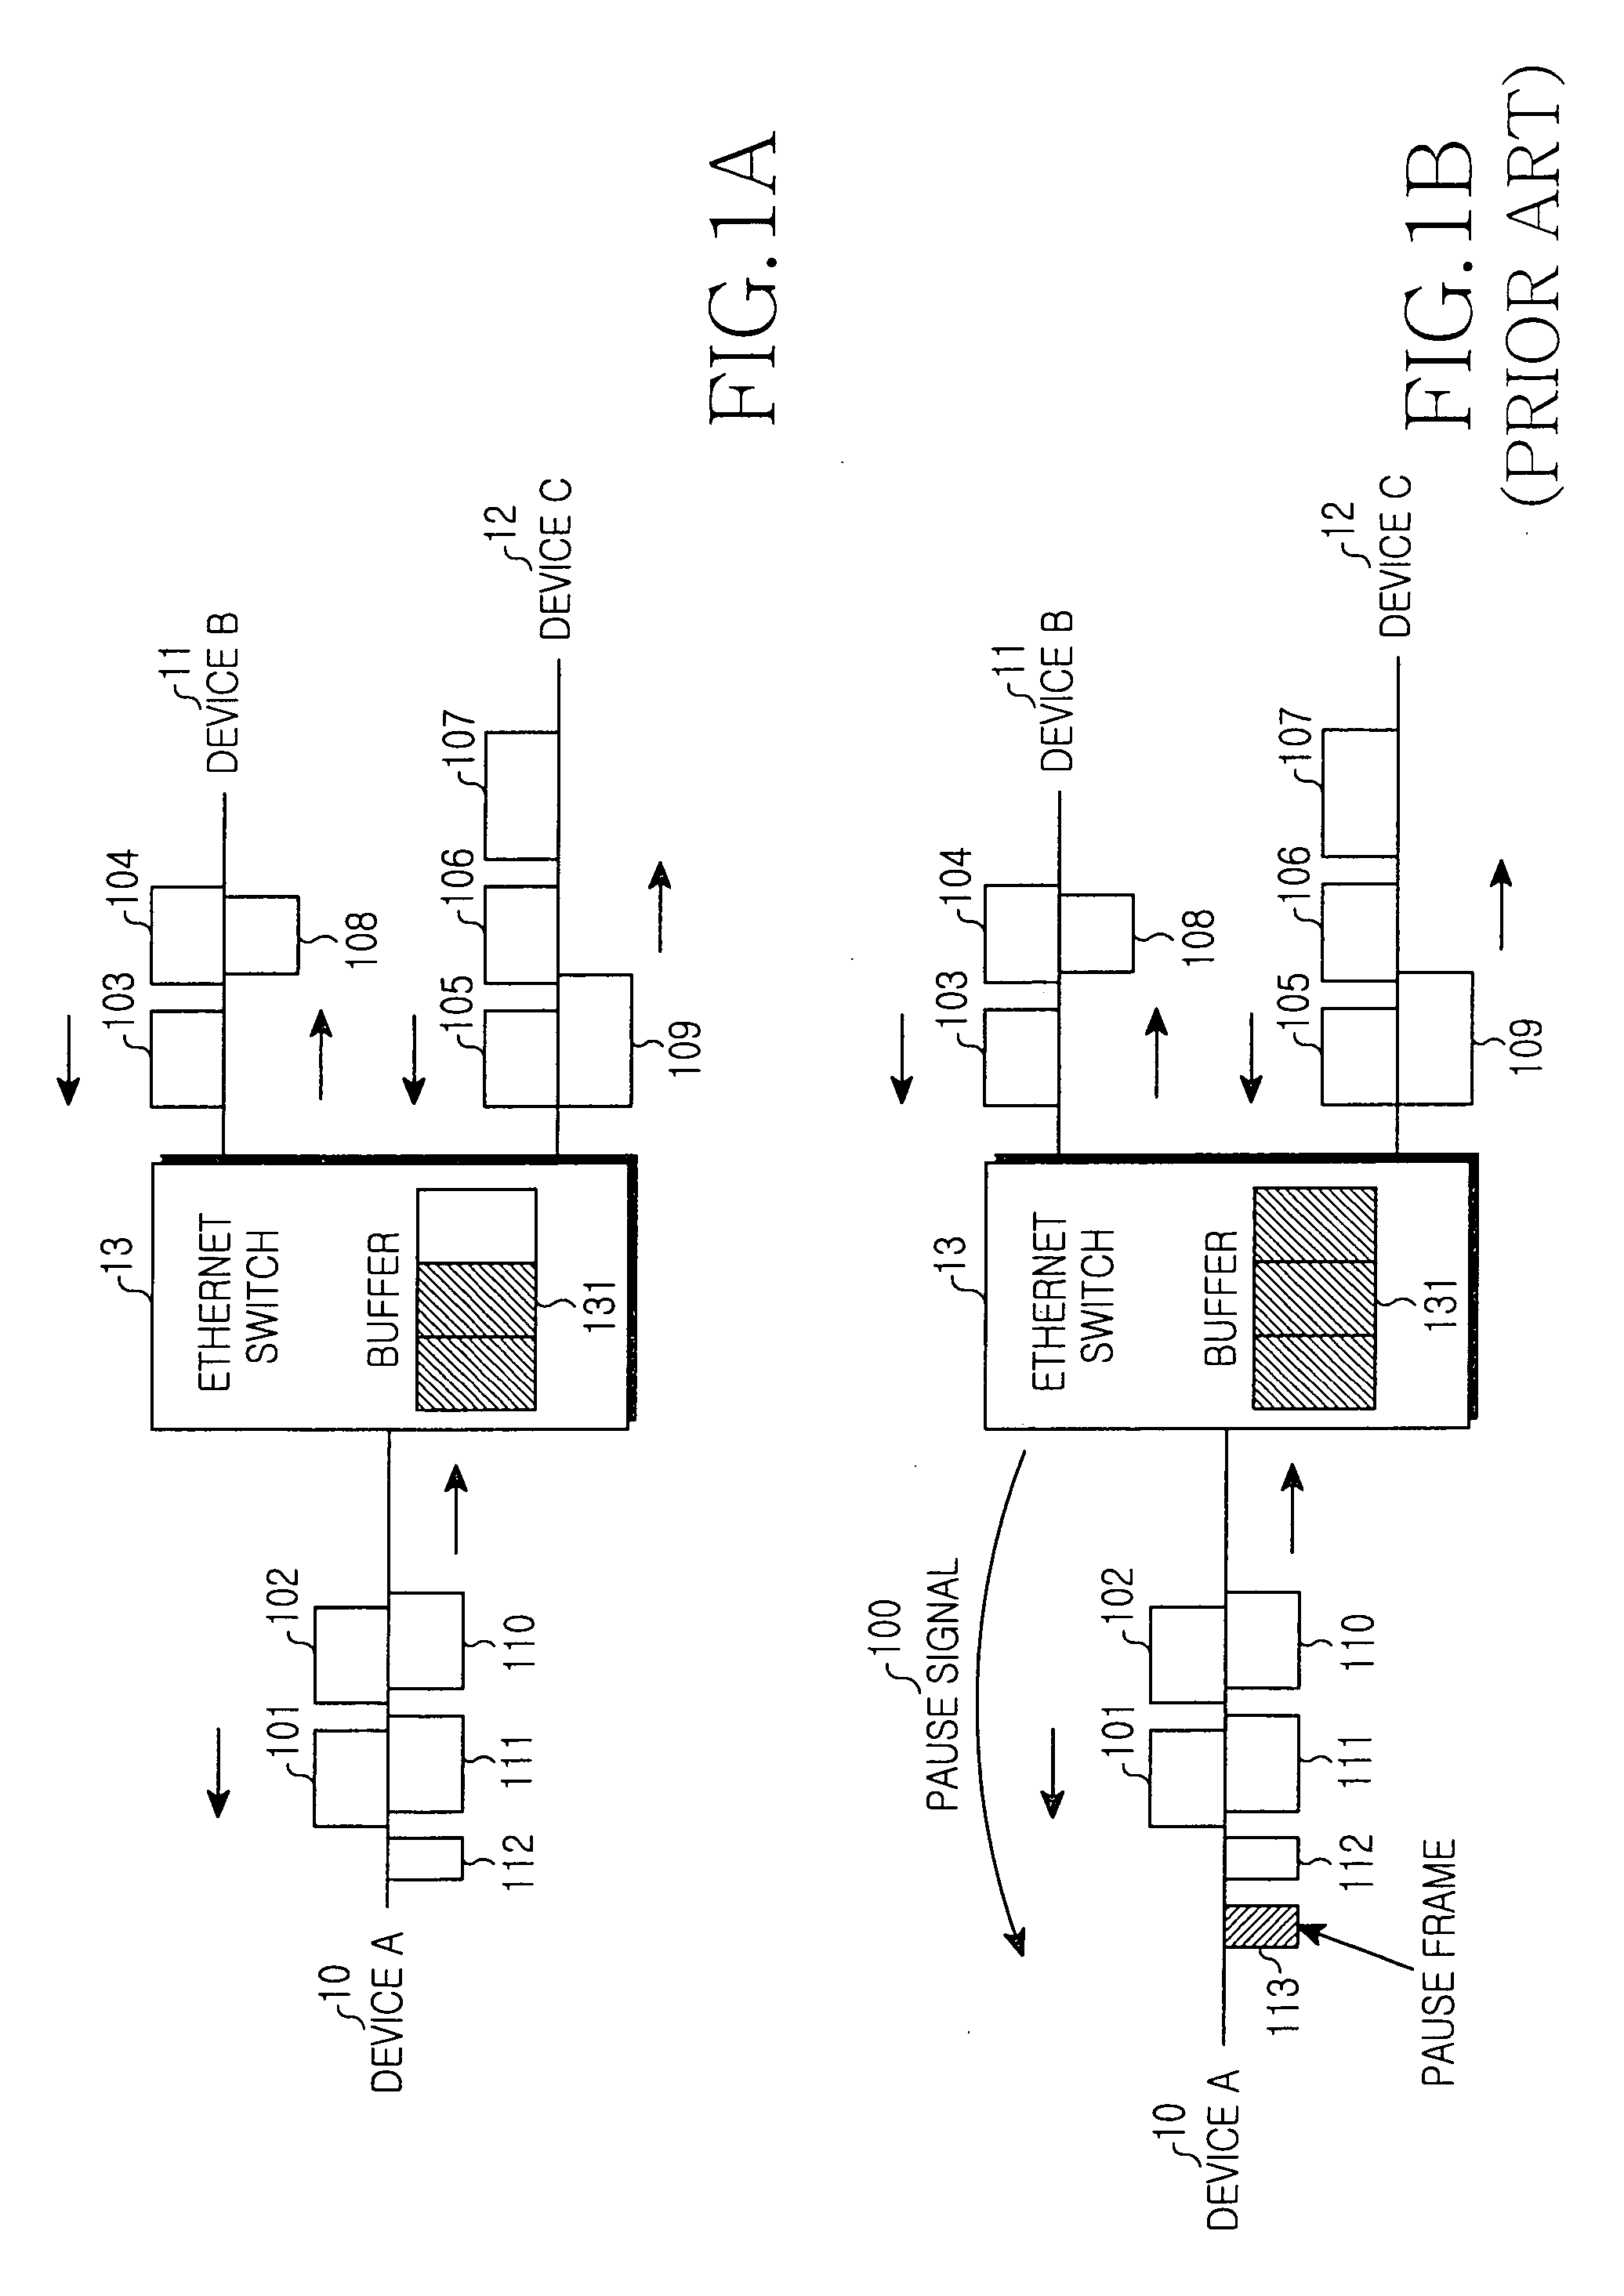 Method of transmitting time-critical information in a synchronous ethernet system